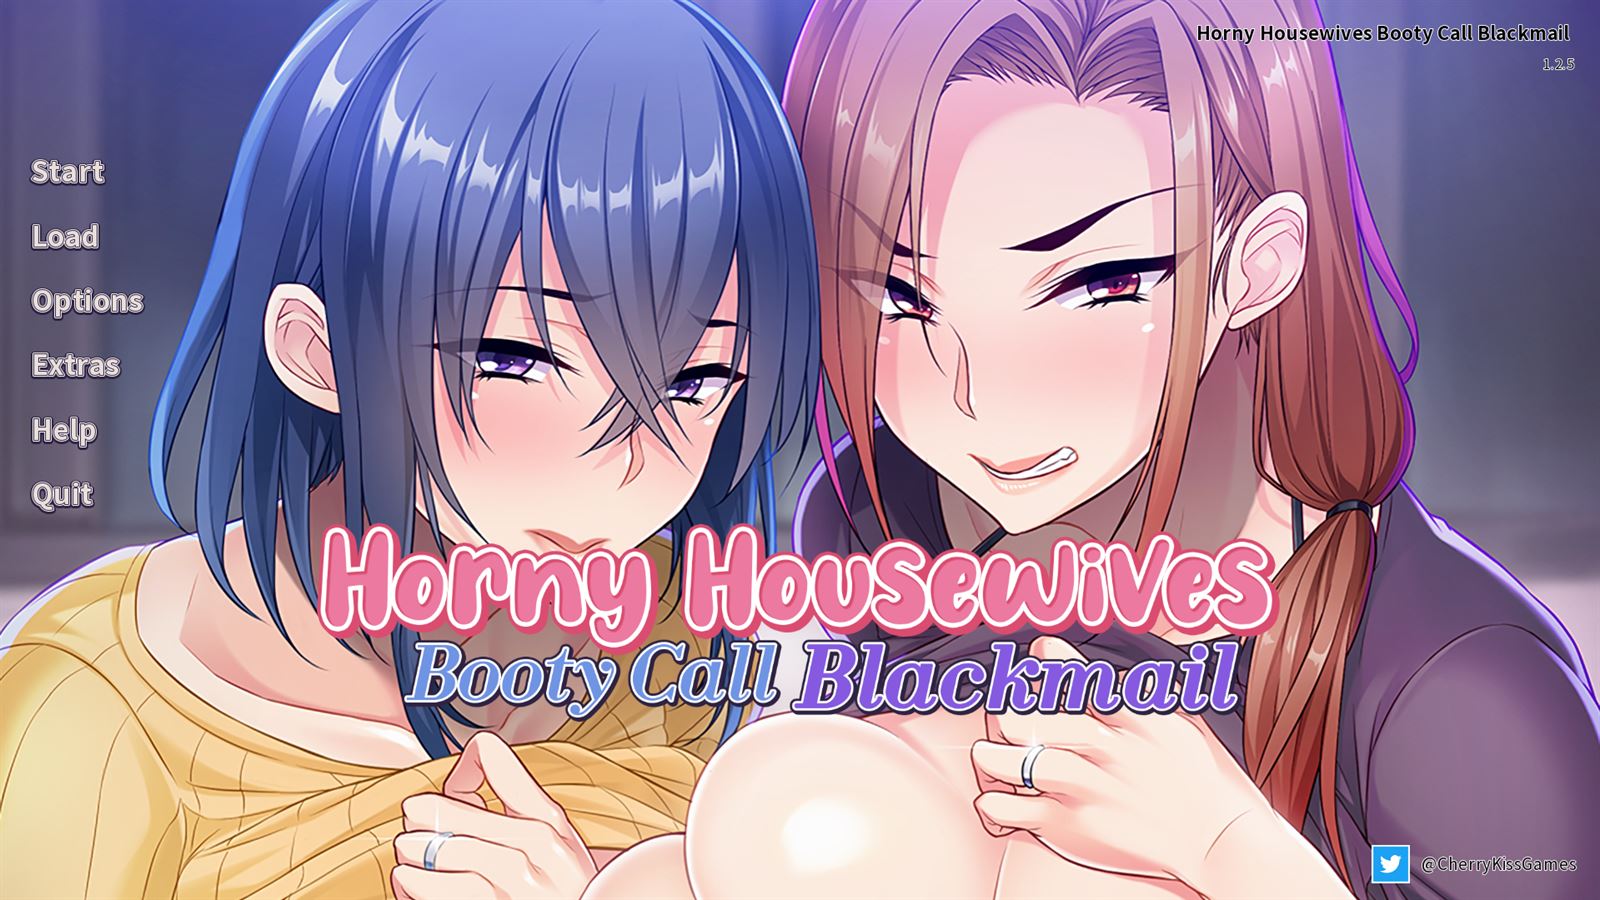 Horny Housewives Booty Call Blackmail Ren'py Porn Sex Game v.Final Download  for Windows